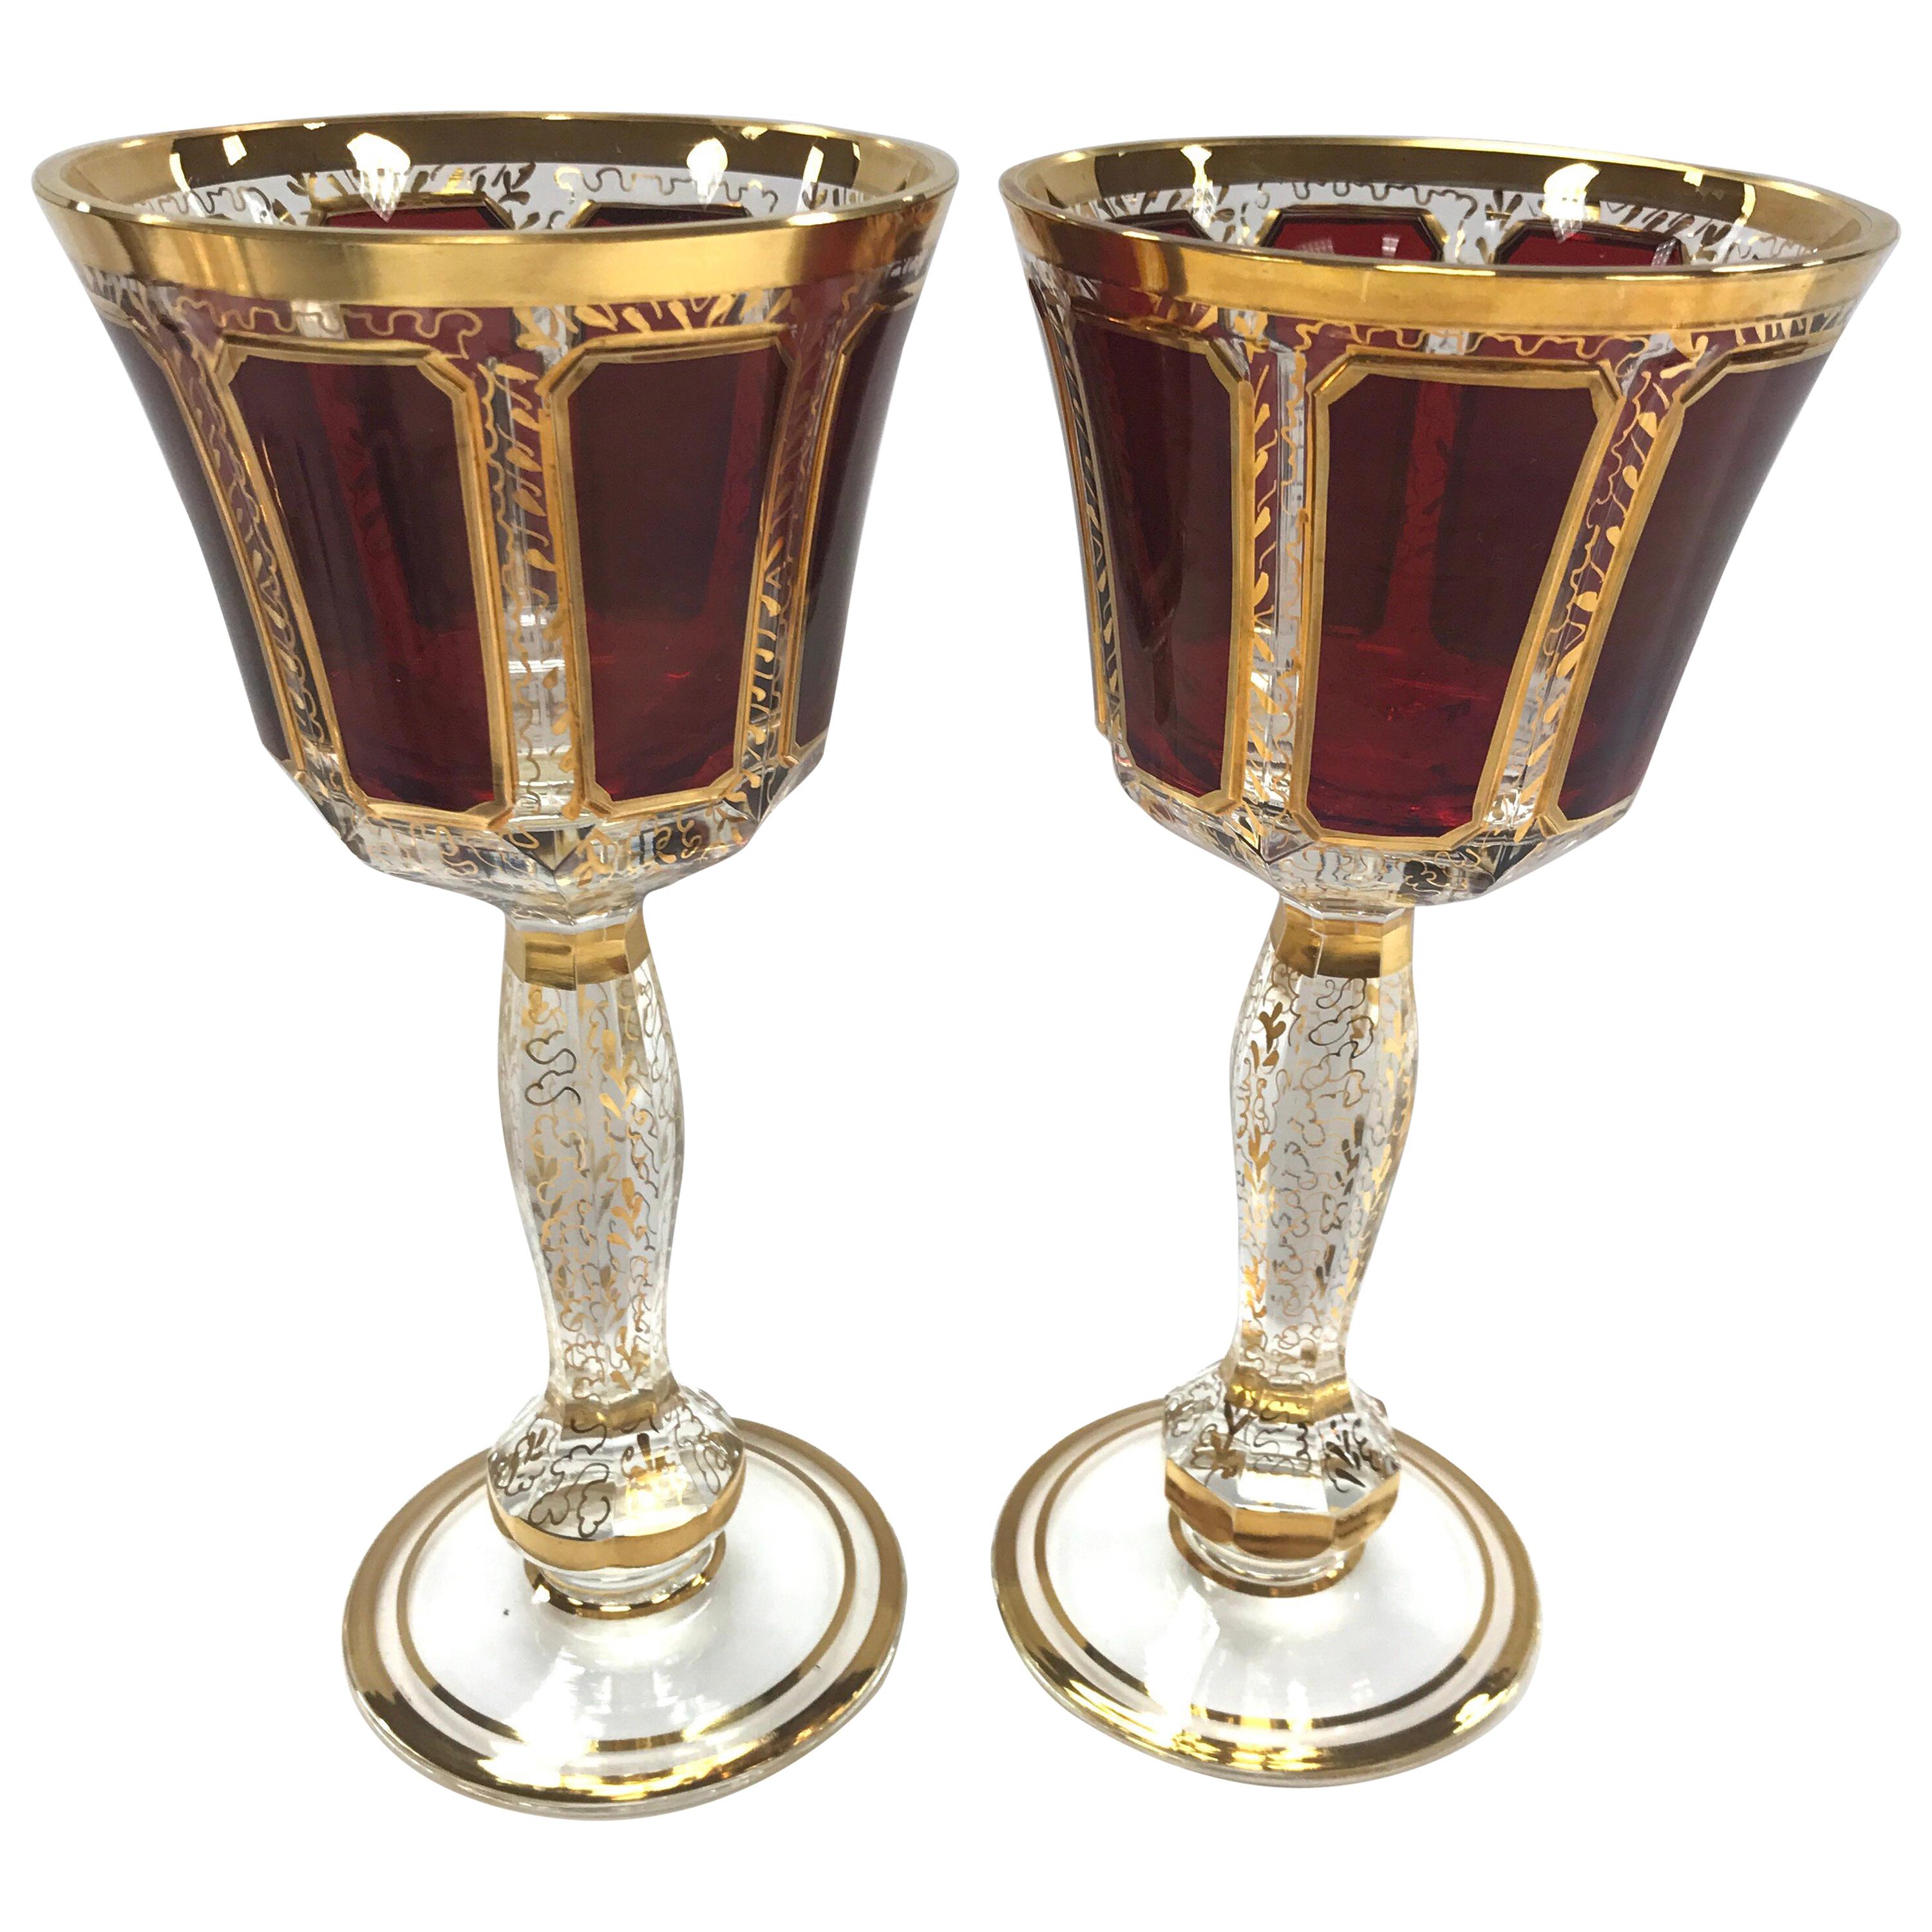 Pair of Burgundy Red and Gold Venetian Wine Glasses